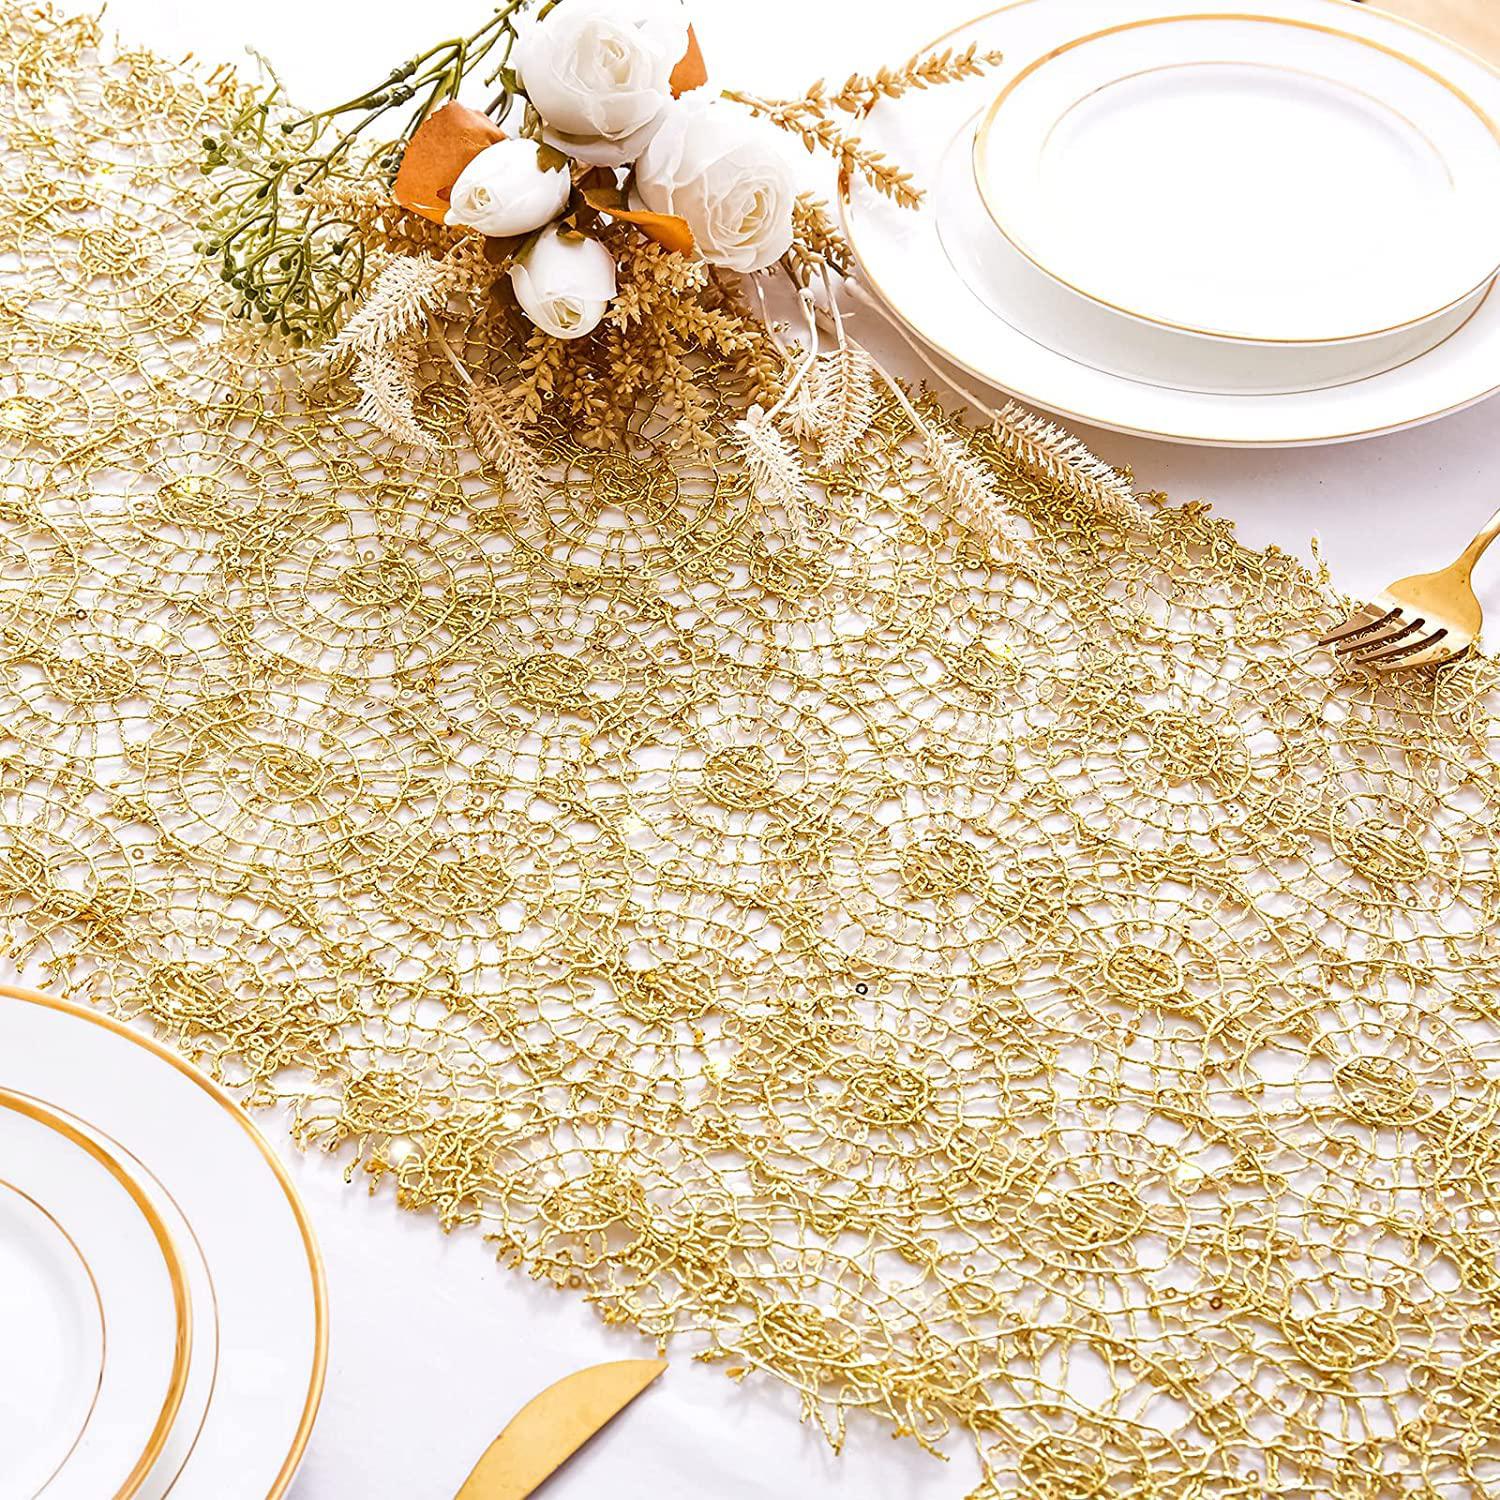 QueenDream 6 pack sequin mesh table runner gold 12 x 80 inch glitter gold table runner for rectangle table for birthday wedding banquet 